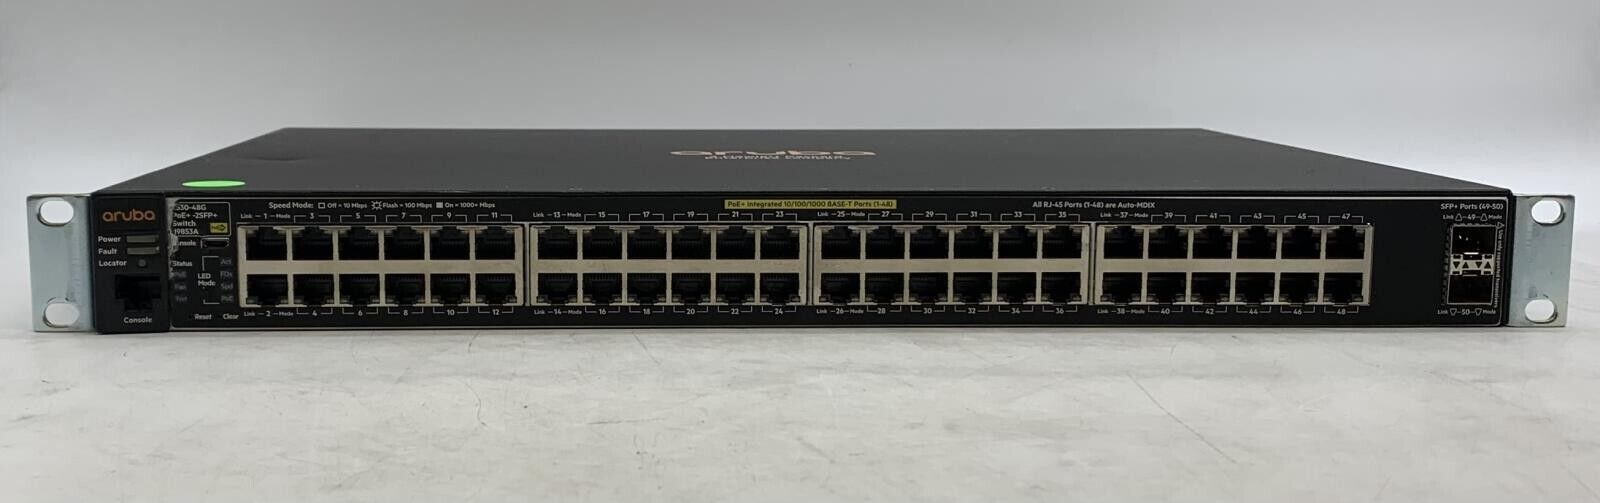 Aruba J9853A 2530-48G 48-Port PoE Managed Ethernet Switch WITH Power Cable